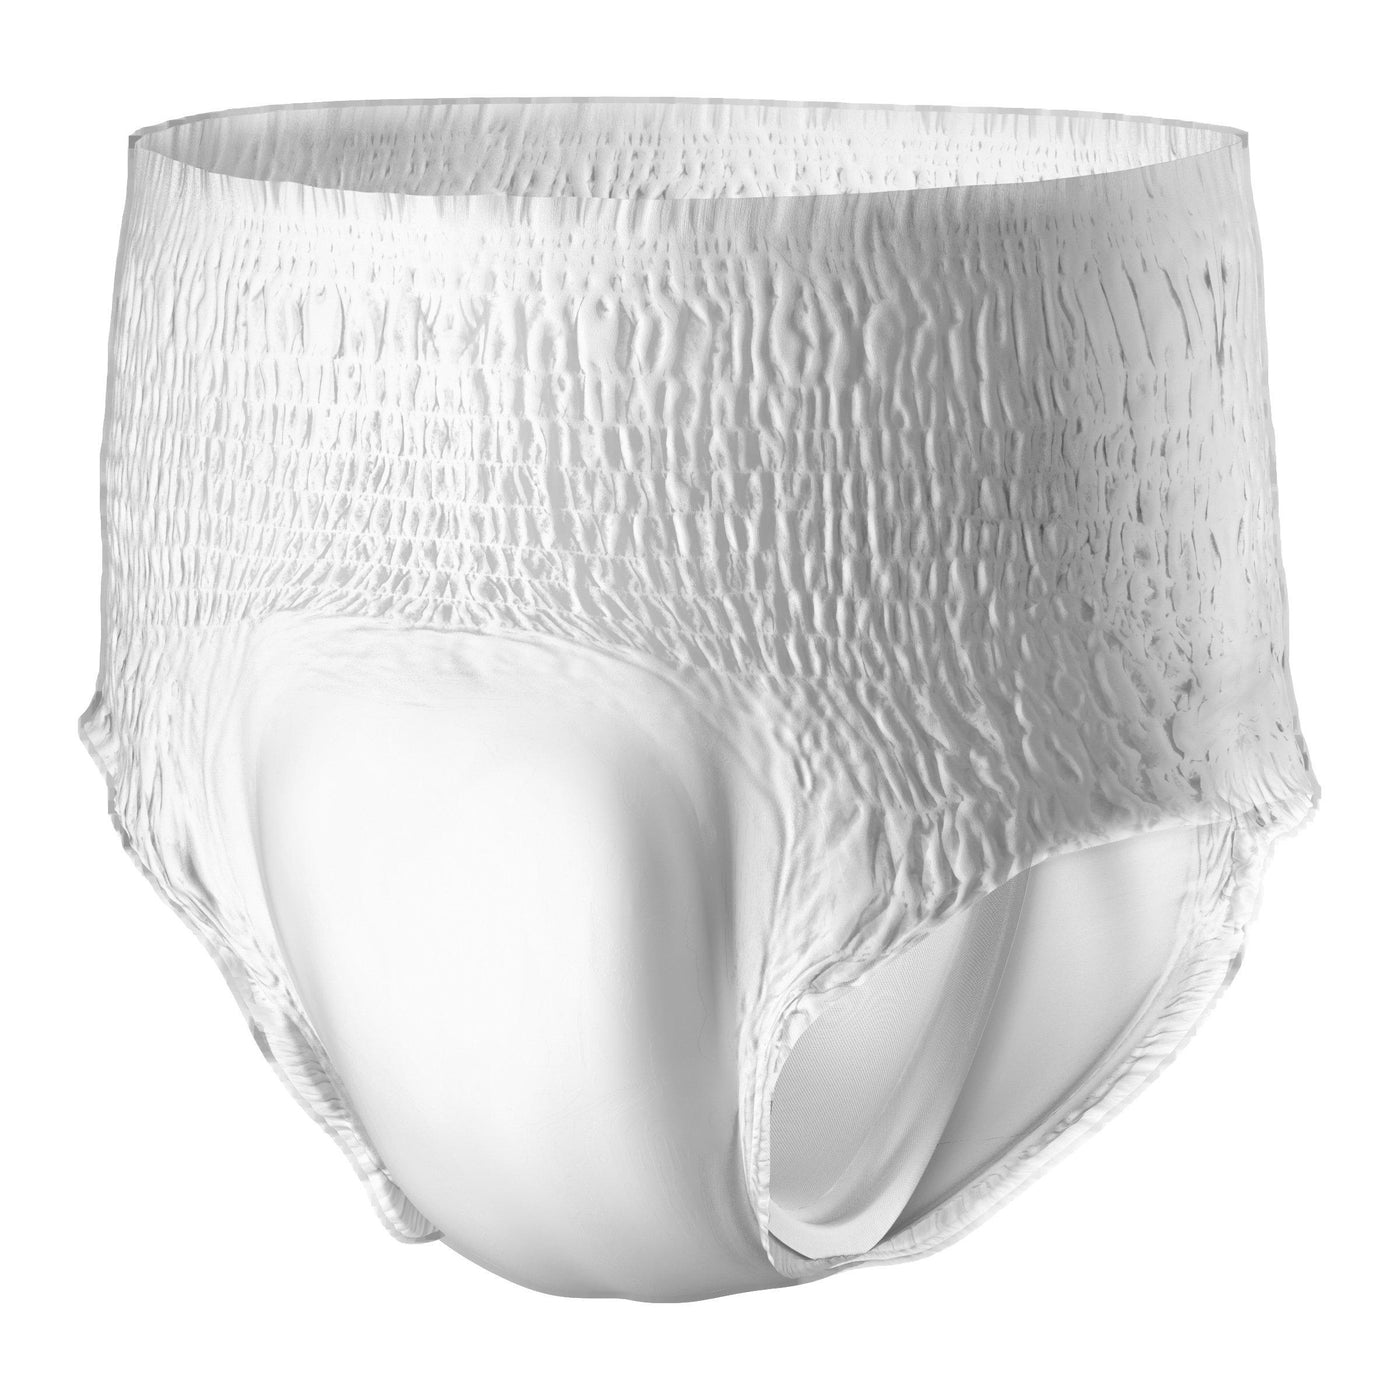 Tranquility Essential Unisex Incontinence Underwear Pull Up